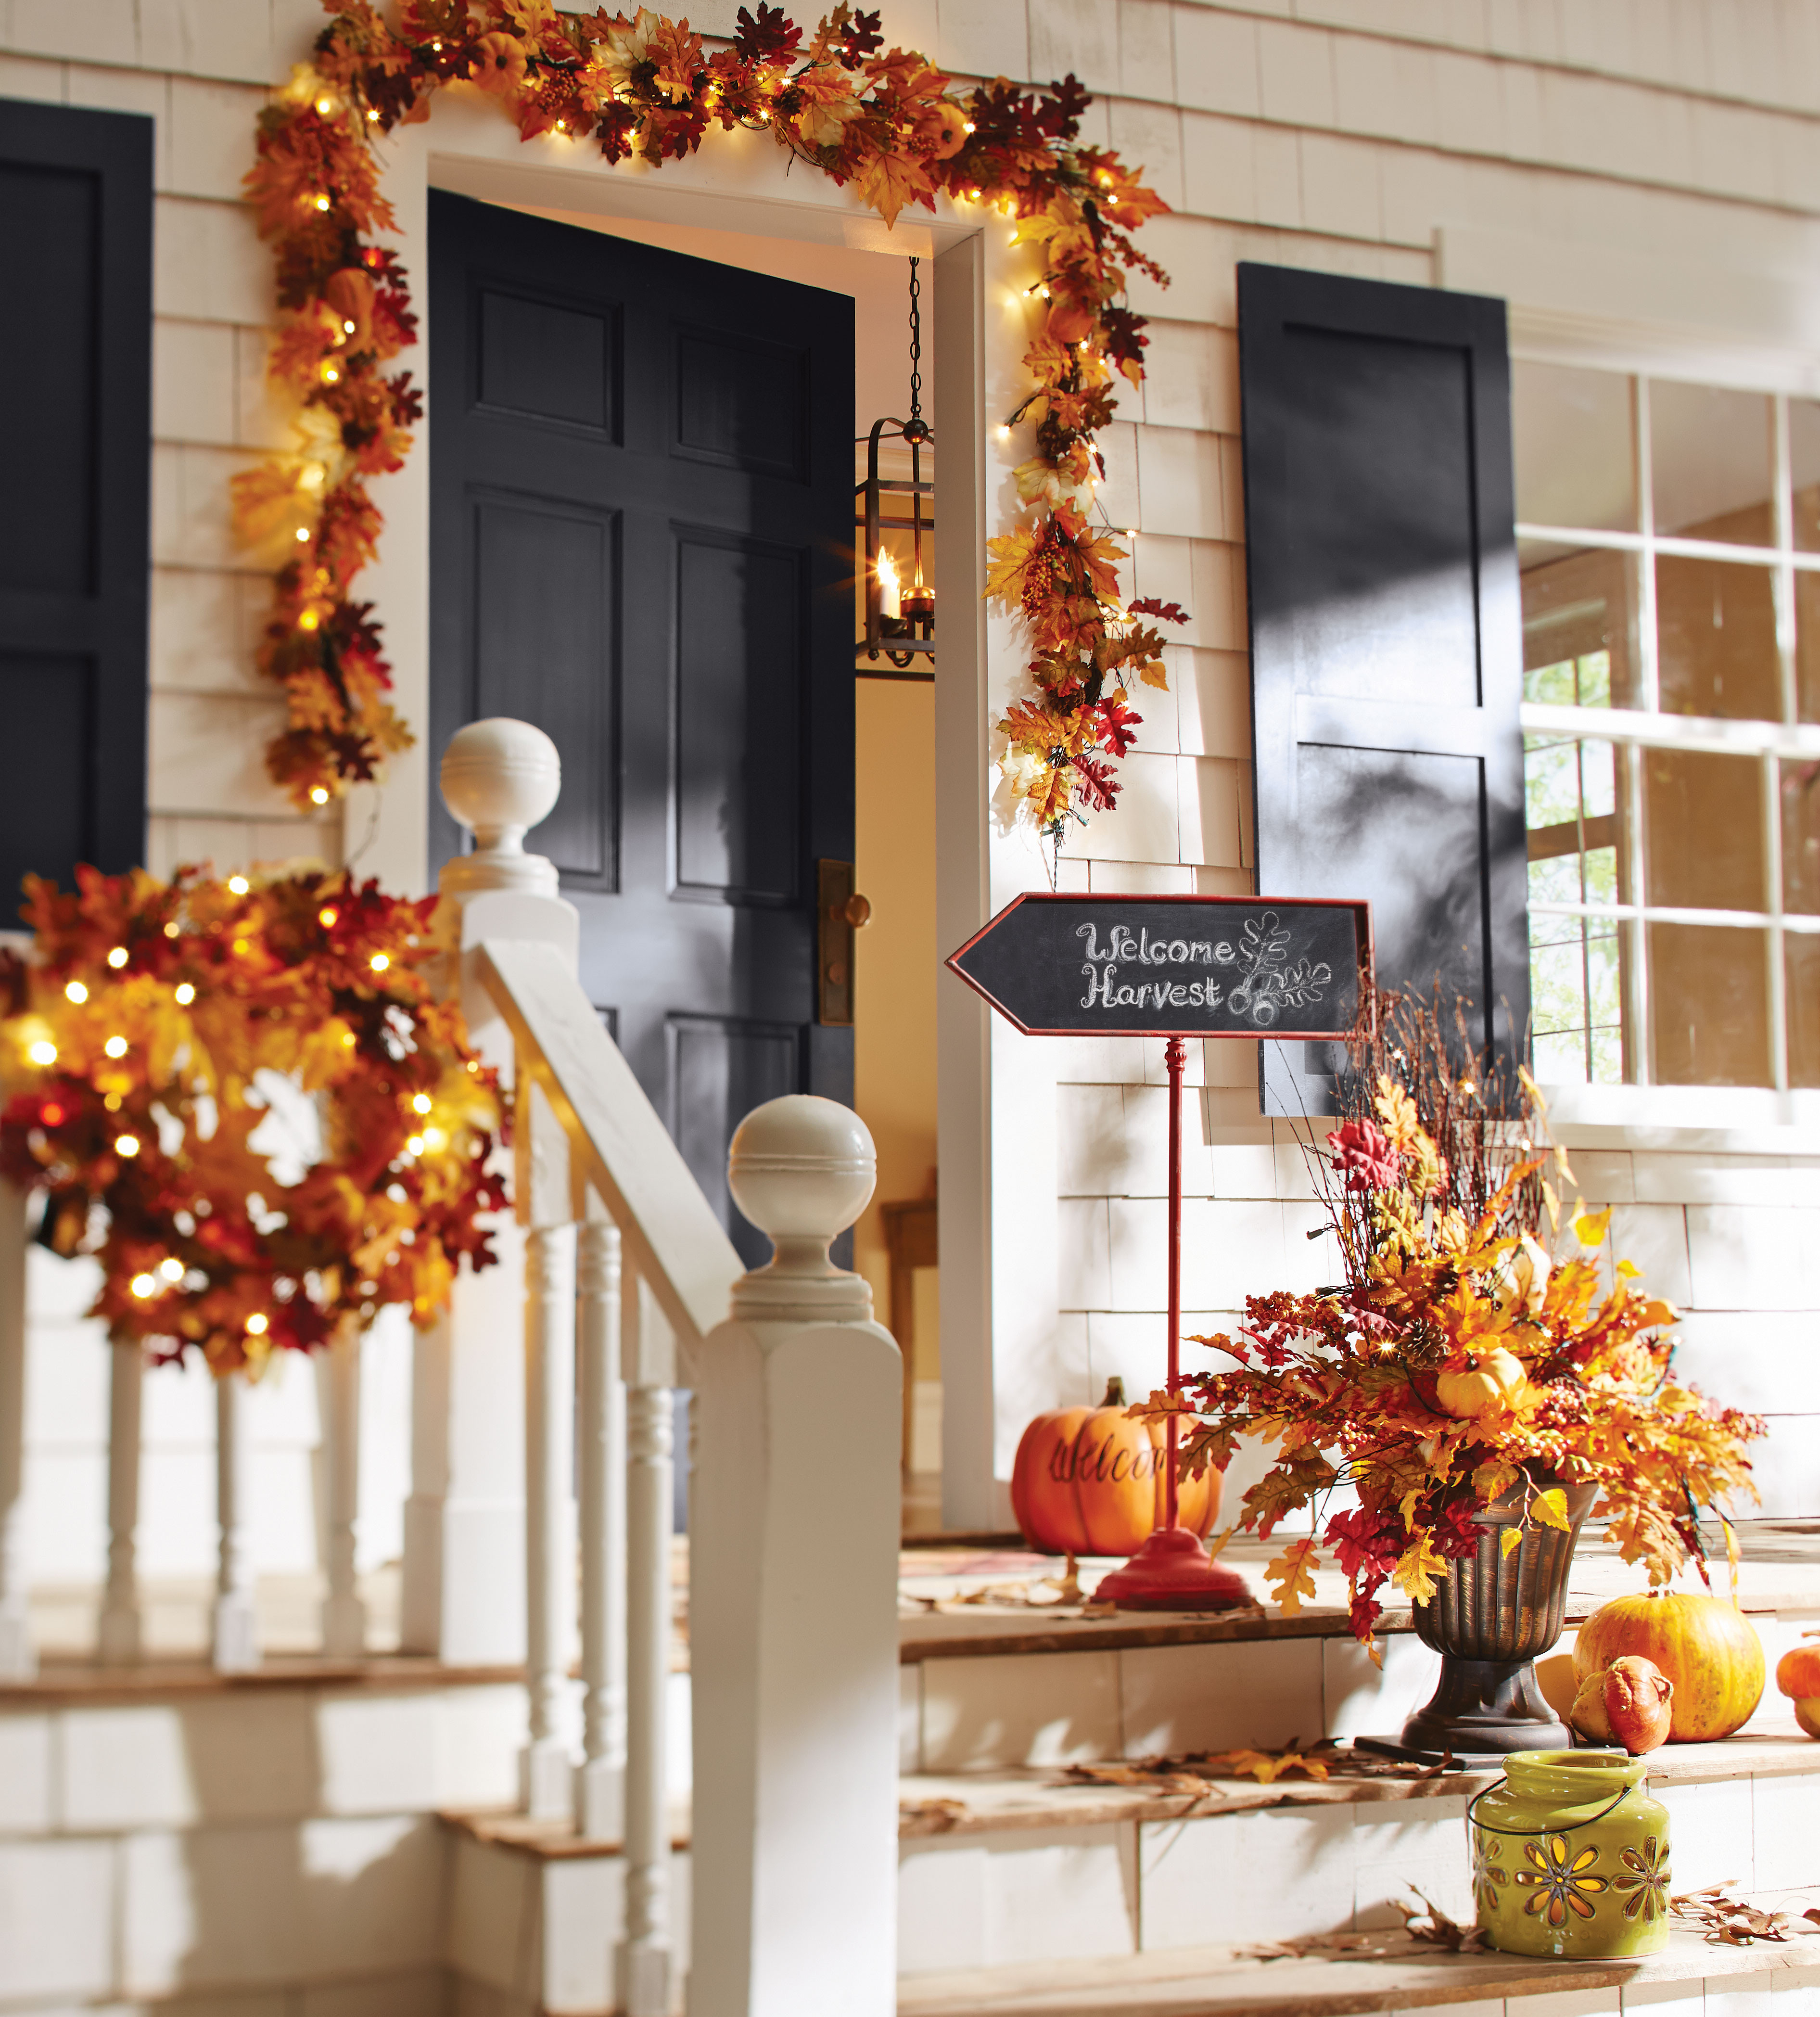 Fall Decor For Front Porch
 Fall Decorating Ideas For Your Front Porch and Entryway